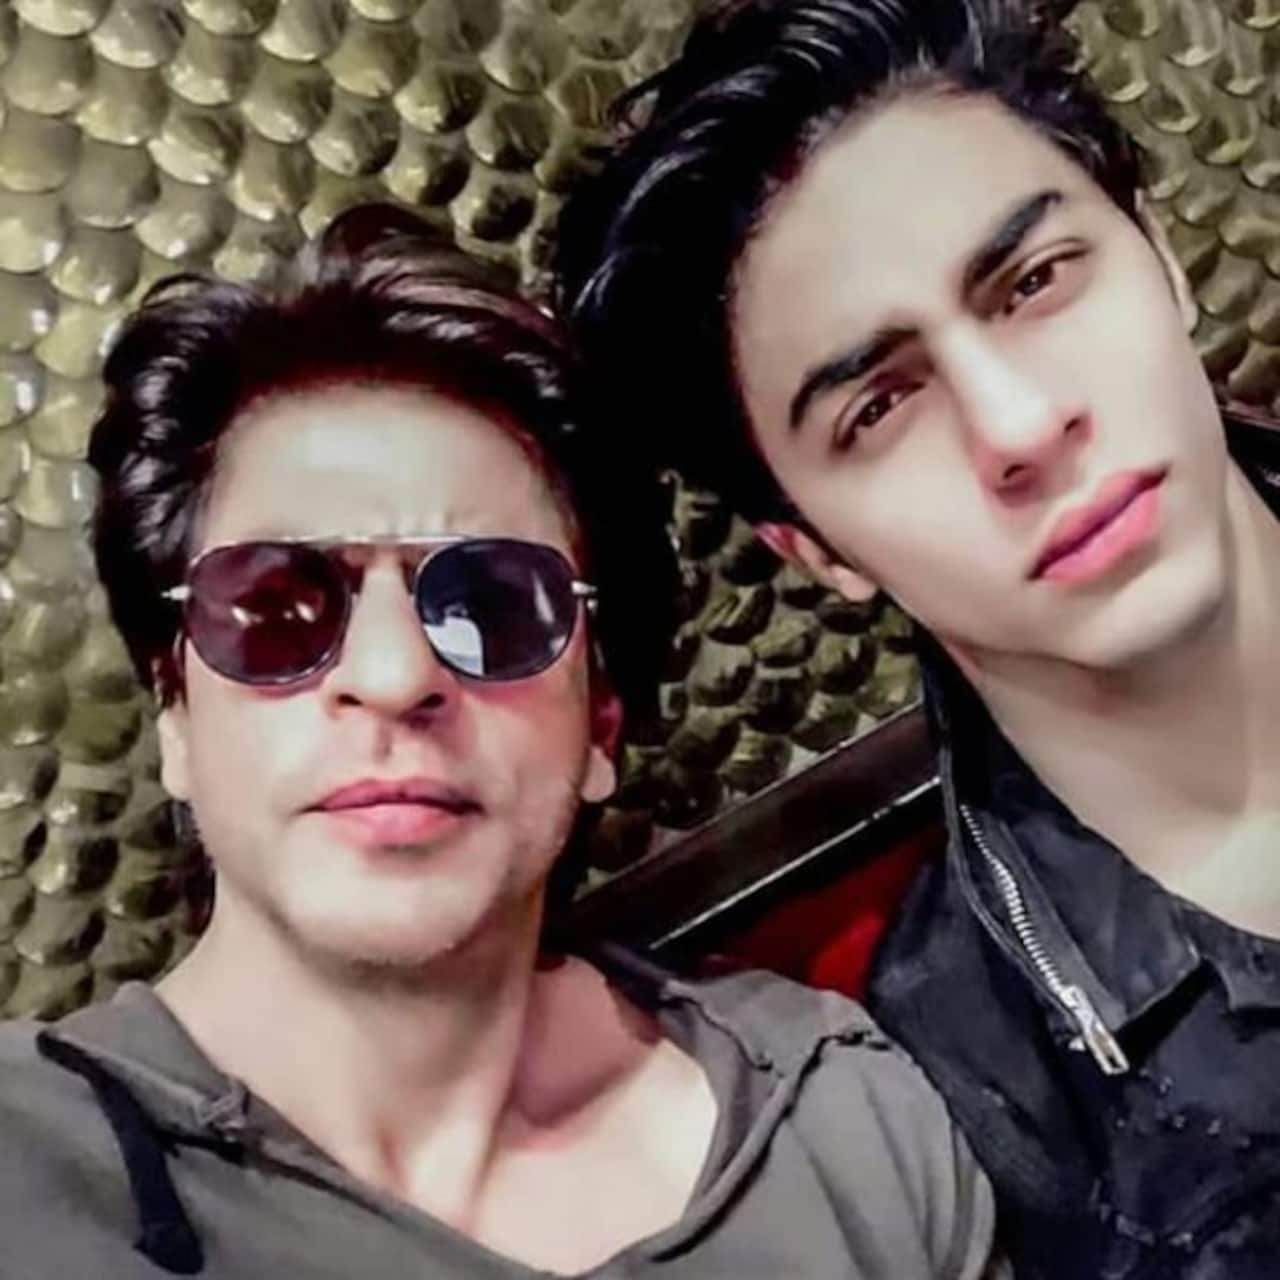 Shah Rukh Khan's son Aryan fixes his hair at the IPL auction; fans say like  father, like son